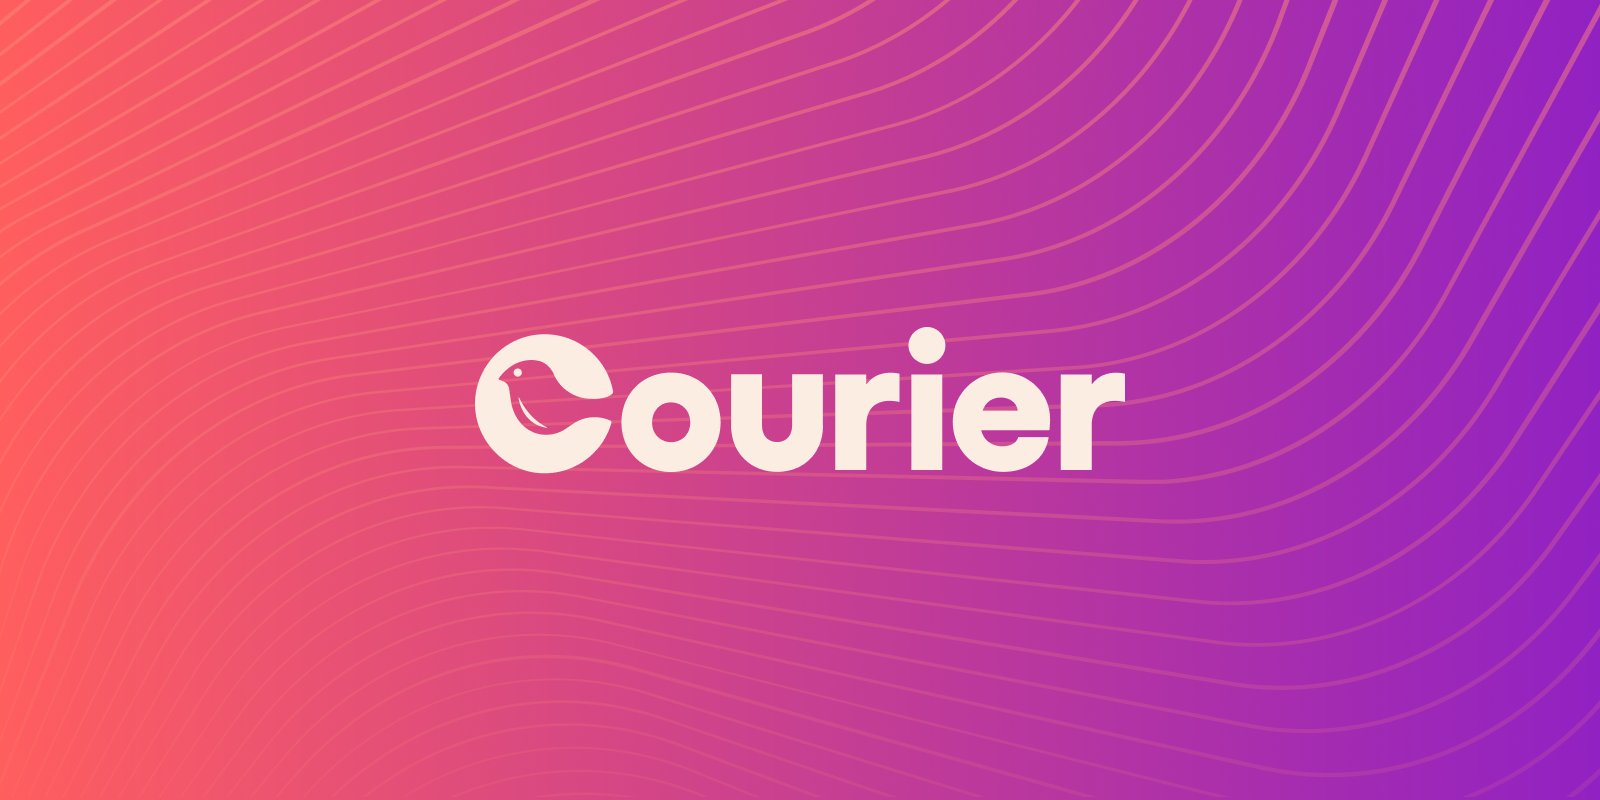 Courier Projects :: Photos, videos, logos, illustrations and branding ::  Behance